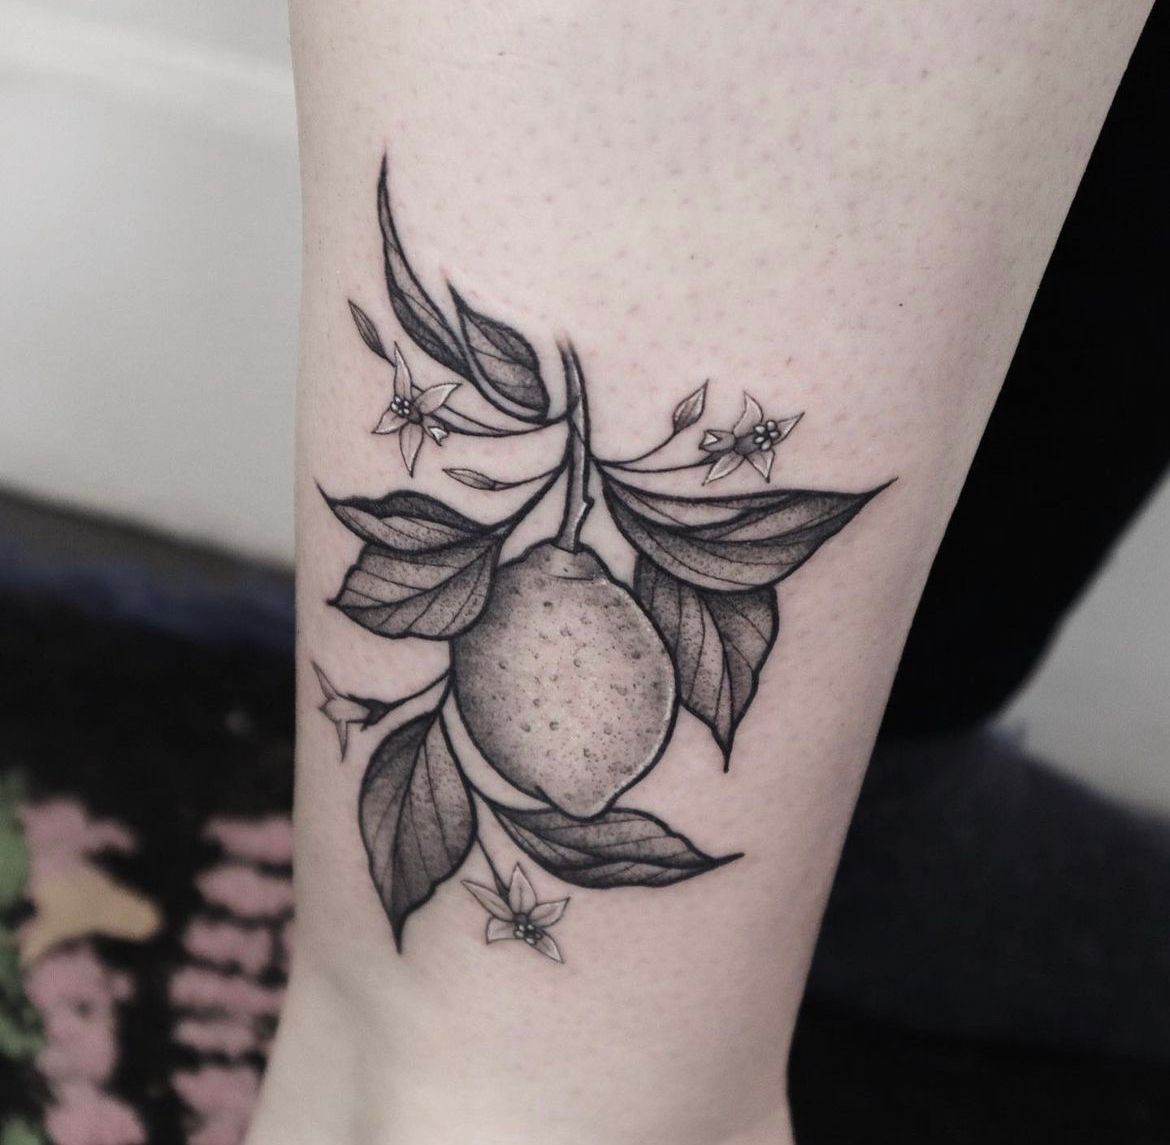 10 Best Lemon Tattoo Ideas Collection By Daily Hind News